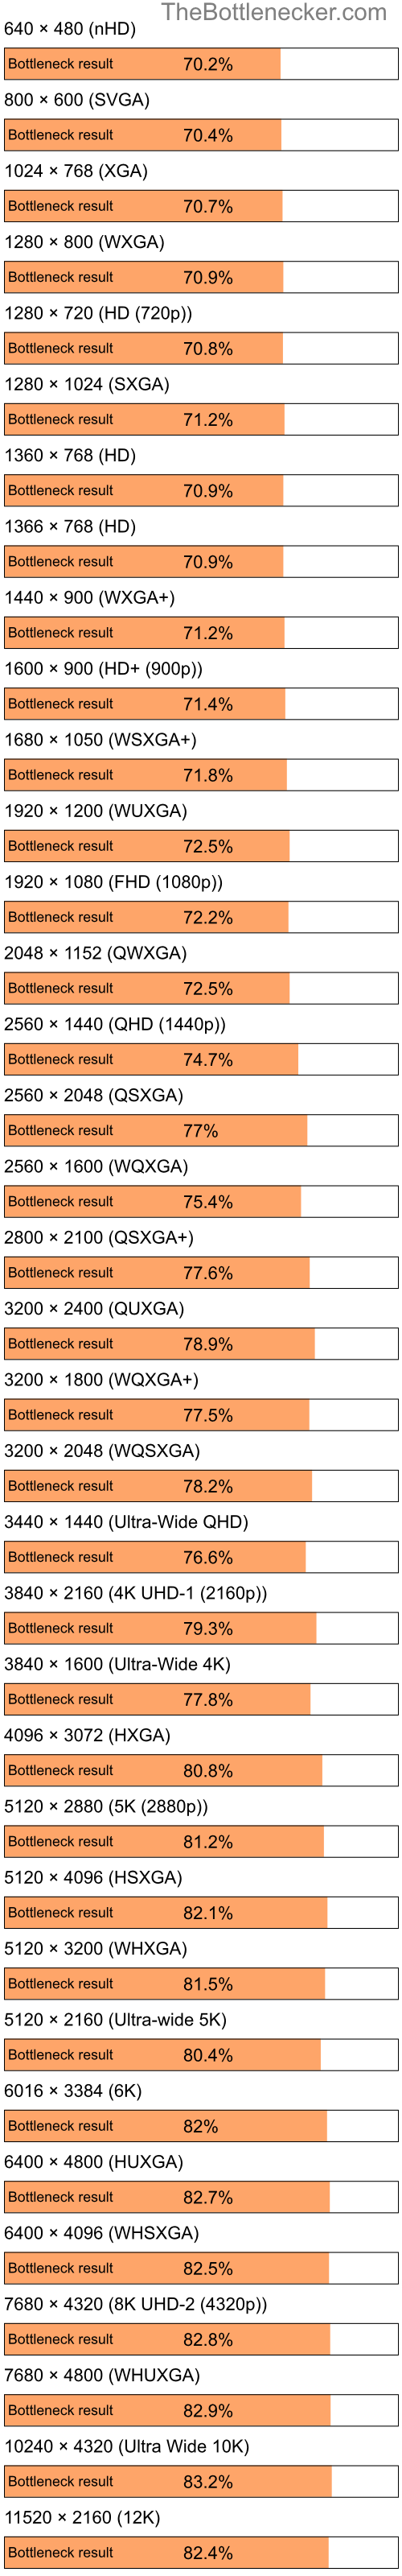 Bottleneck results by resolution for Intel Celeron M and NVIDIA GeForce 6700 XL in Graphic Card Intense Tasks